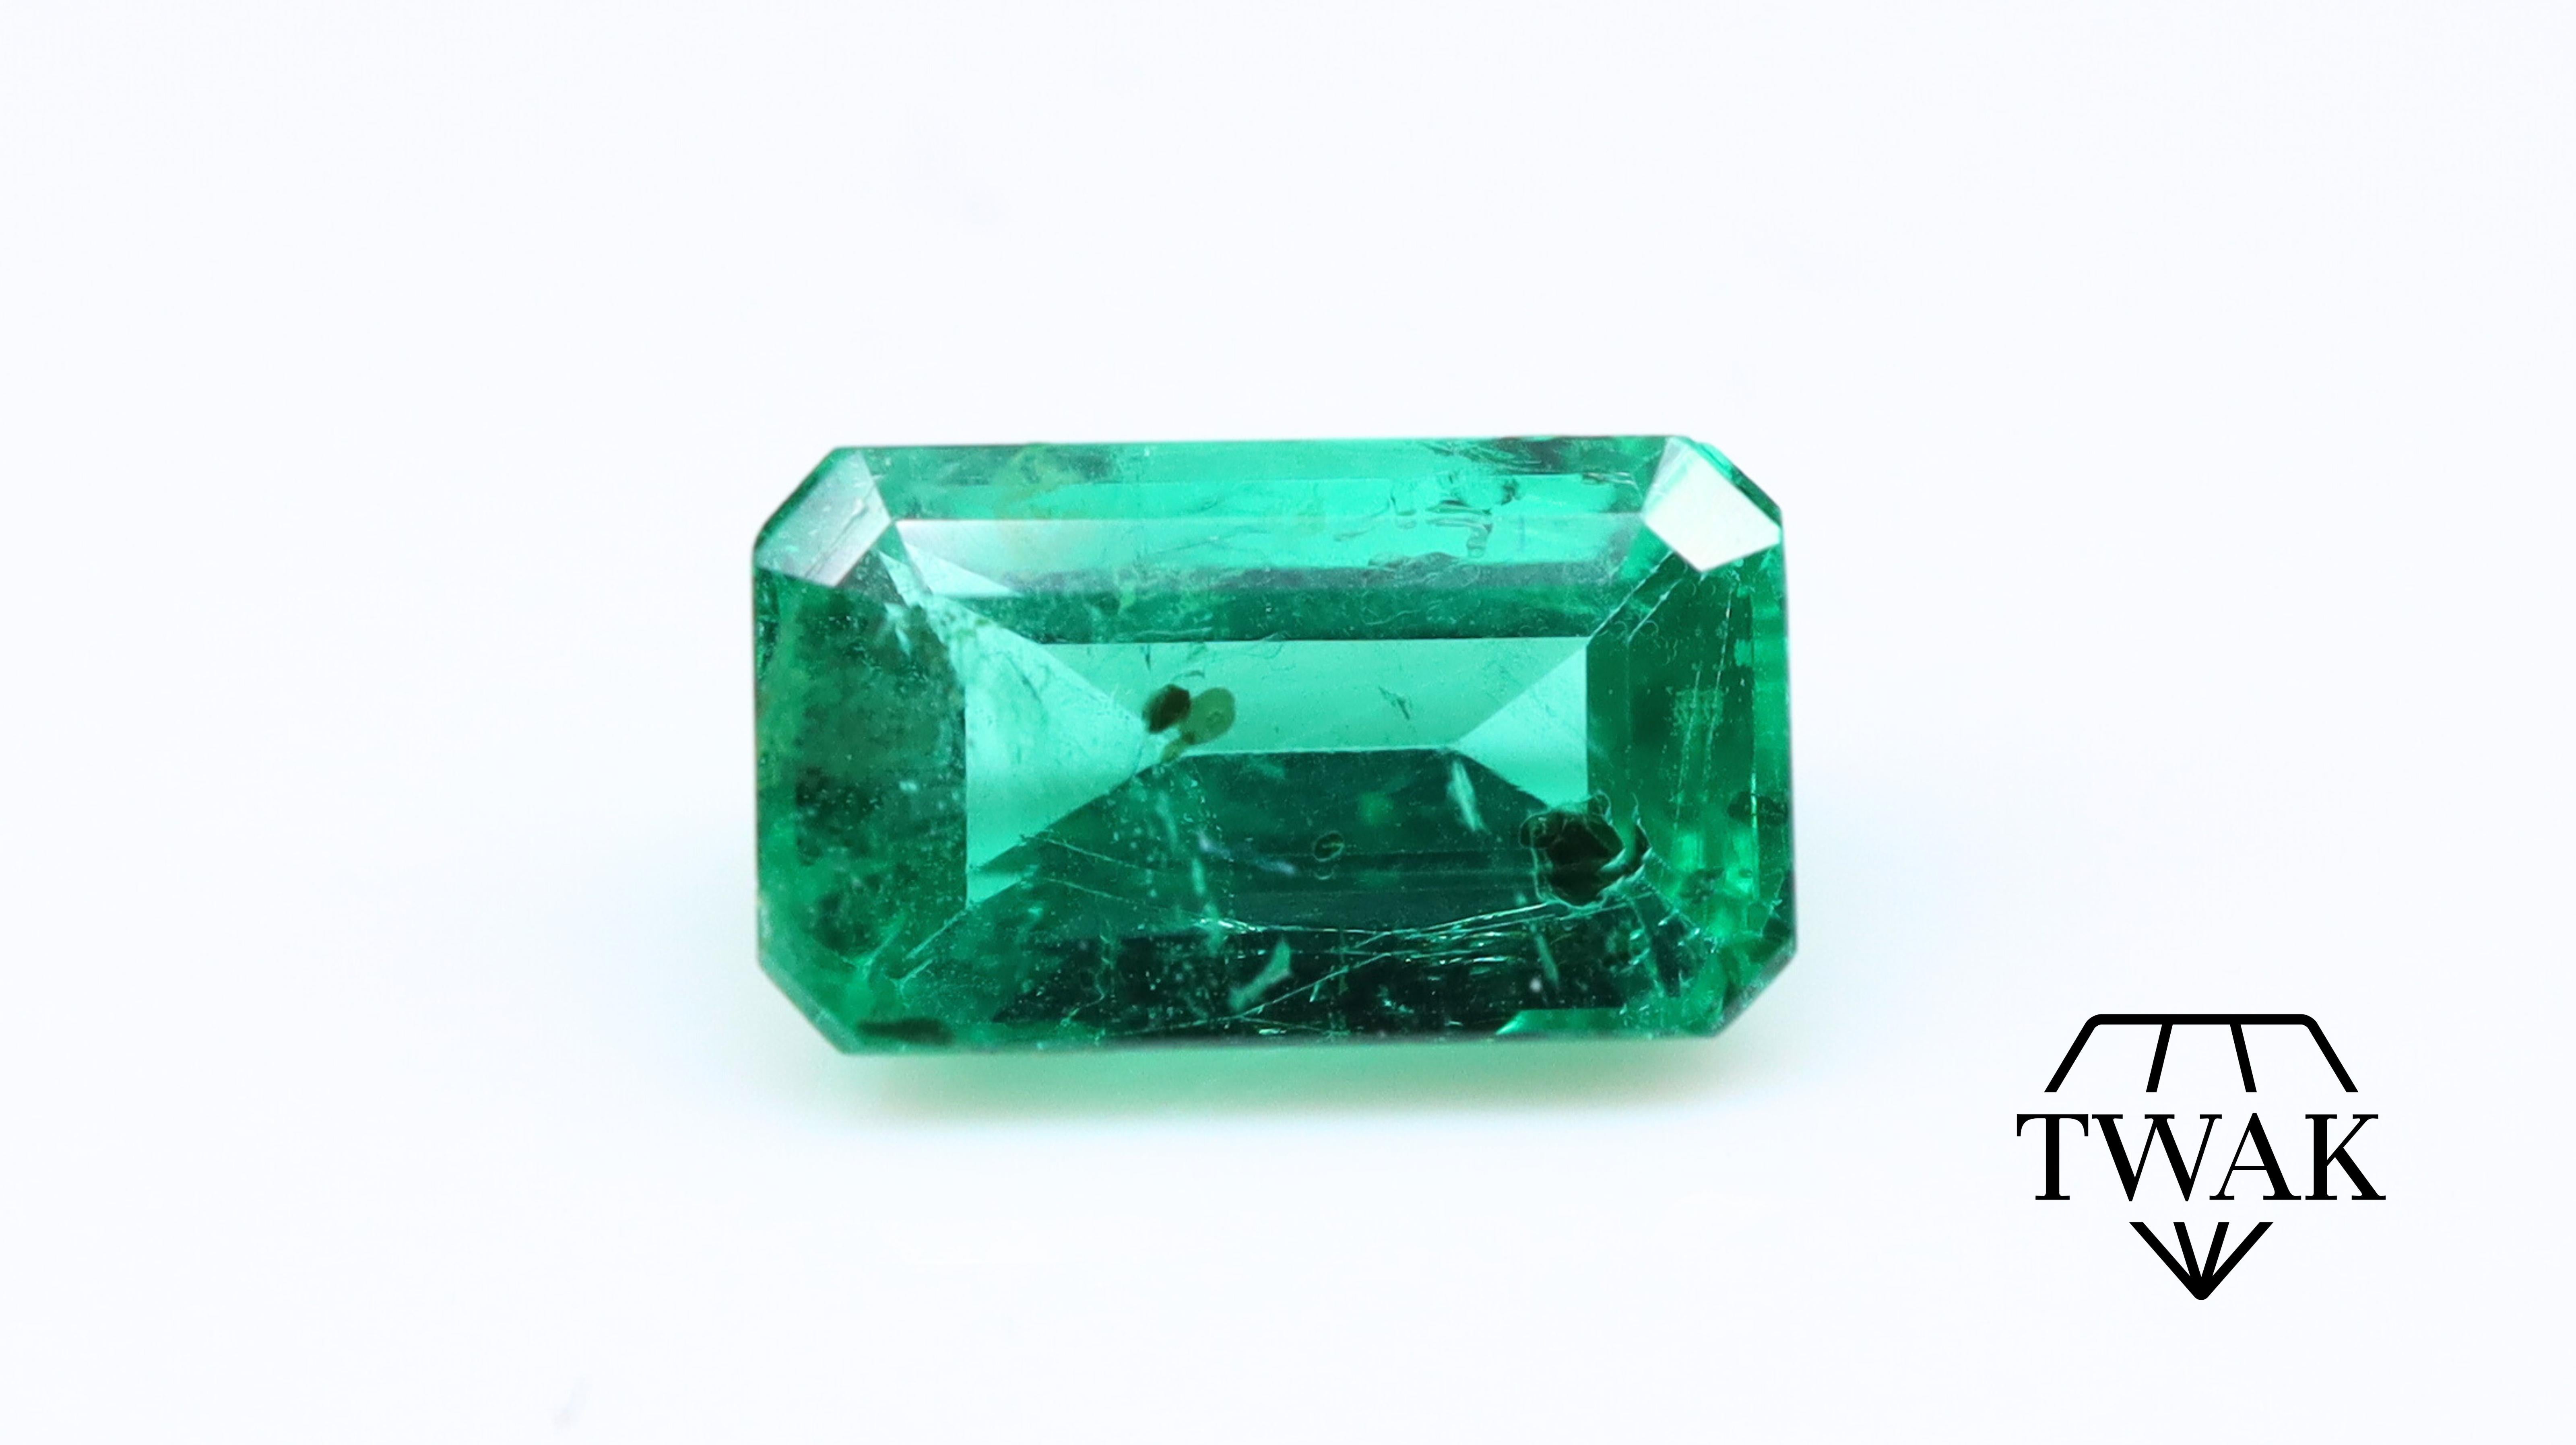 A beautiful Emerald with excellent color, crystal, and saturation.

Details and description:
Dimensions: 7.64 x 4.50 x 3.90mm
Weight: 1.05ct
Color: Green 
Treatment: Oil

Emeralds are naturally porous and inclusive stones, with surface reaching